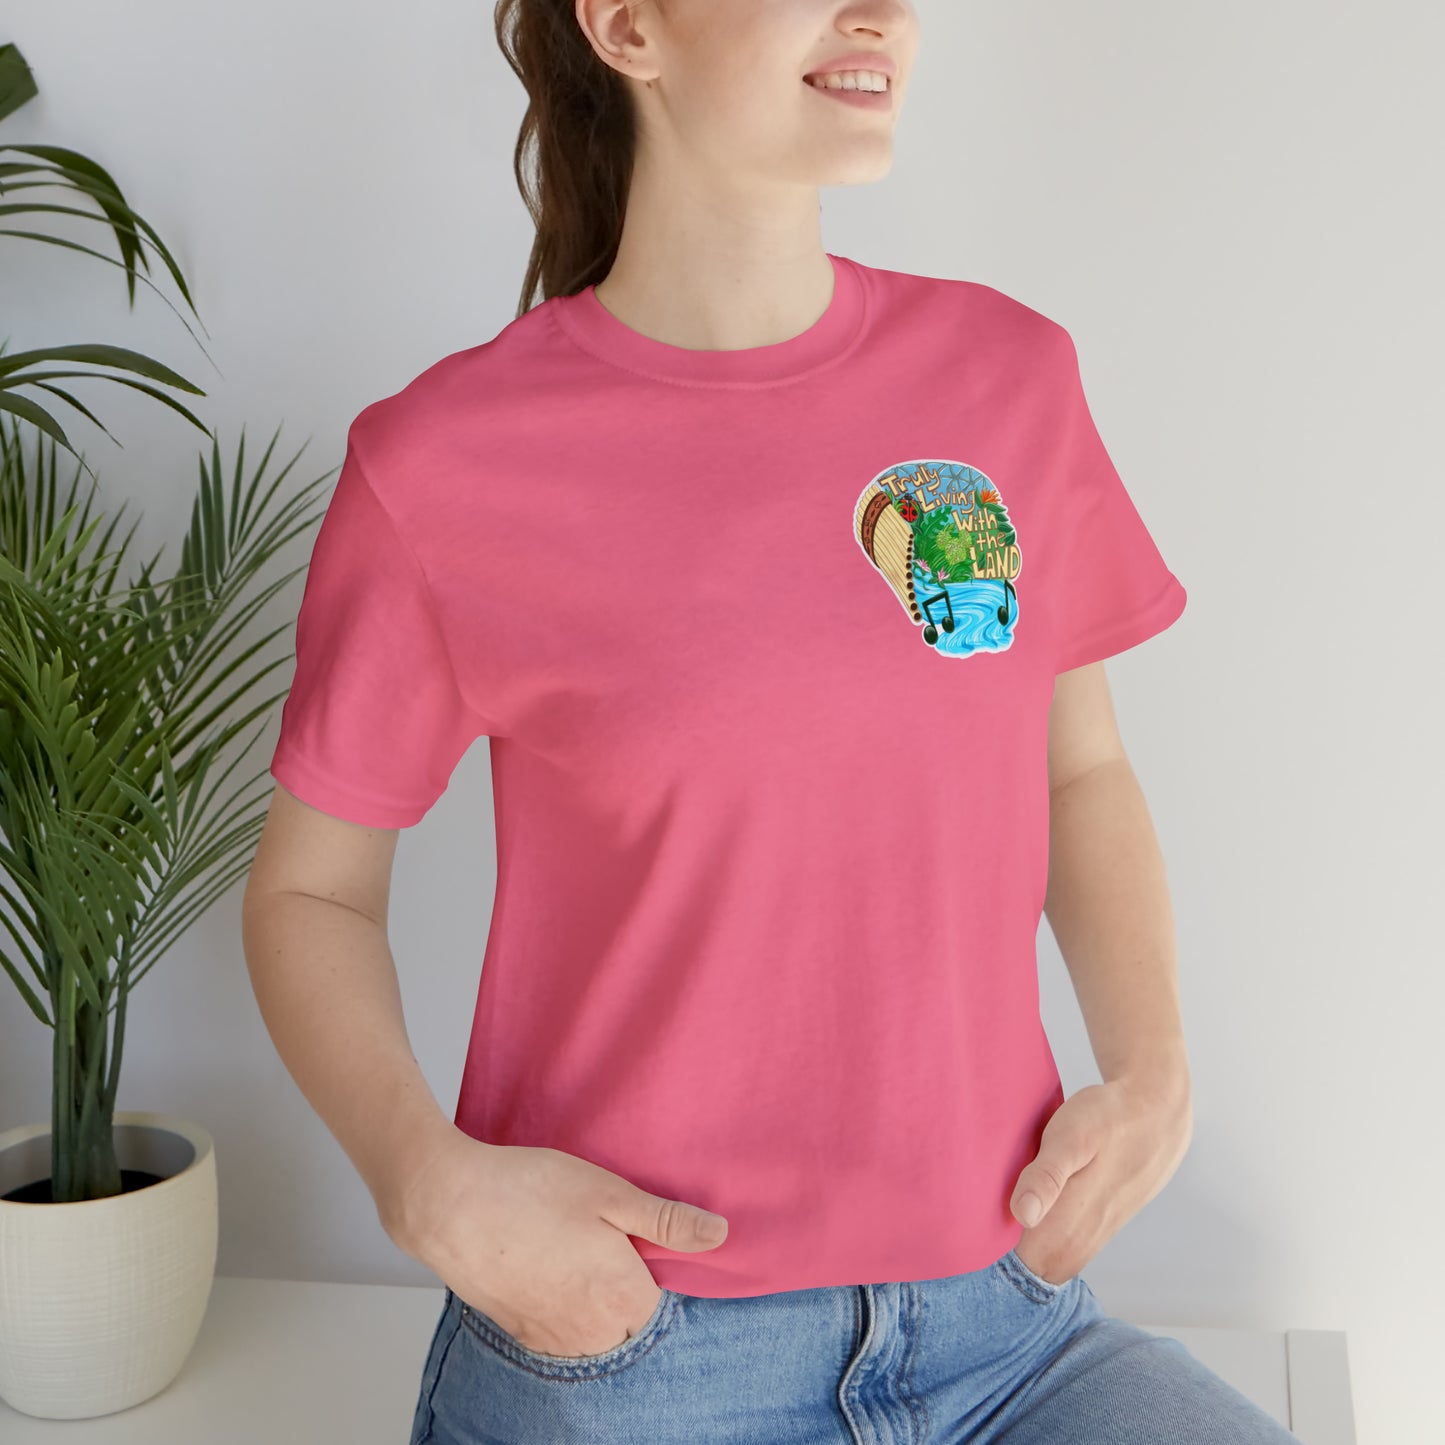 Lifestyle Charity Pink Pan Flute Shirt 